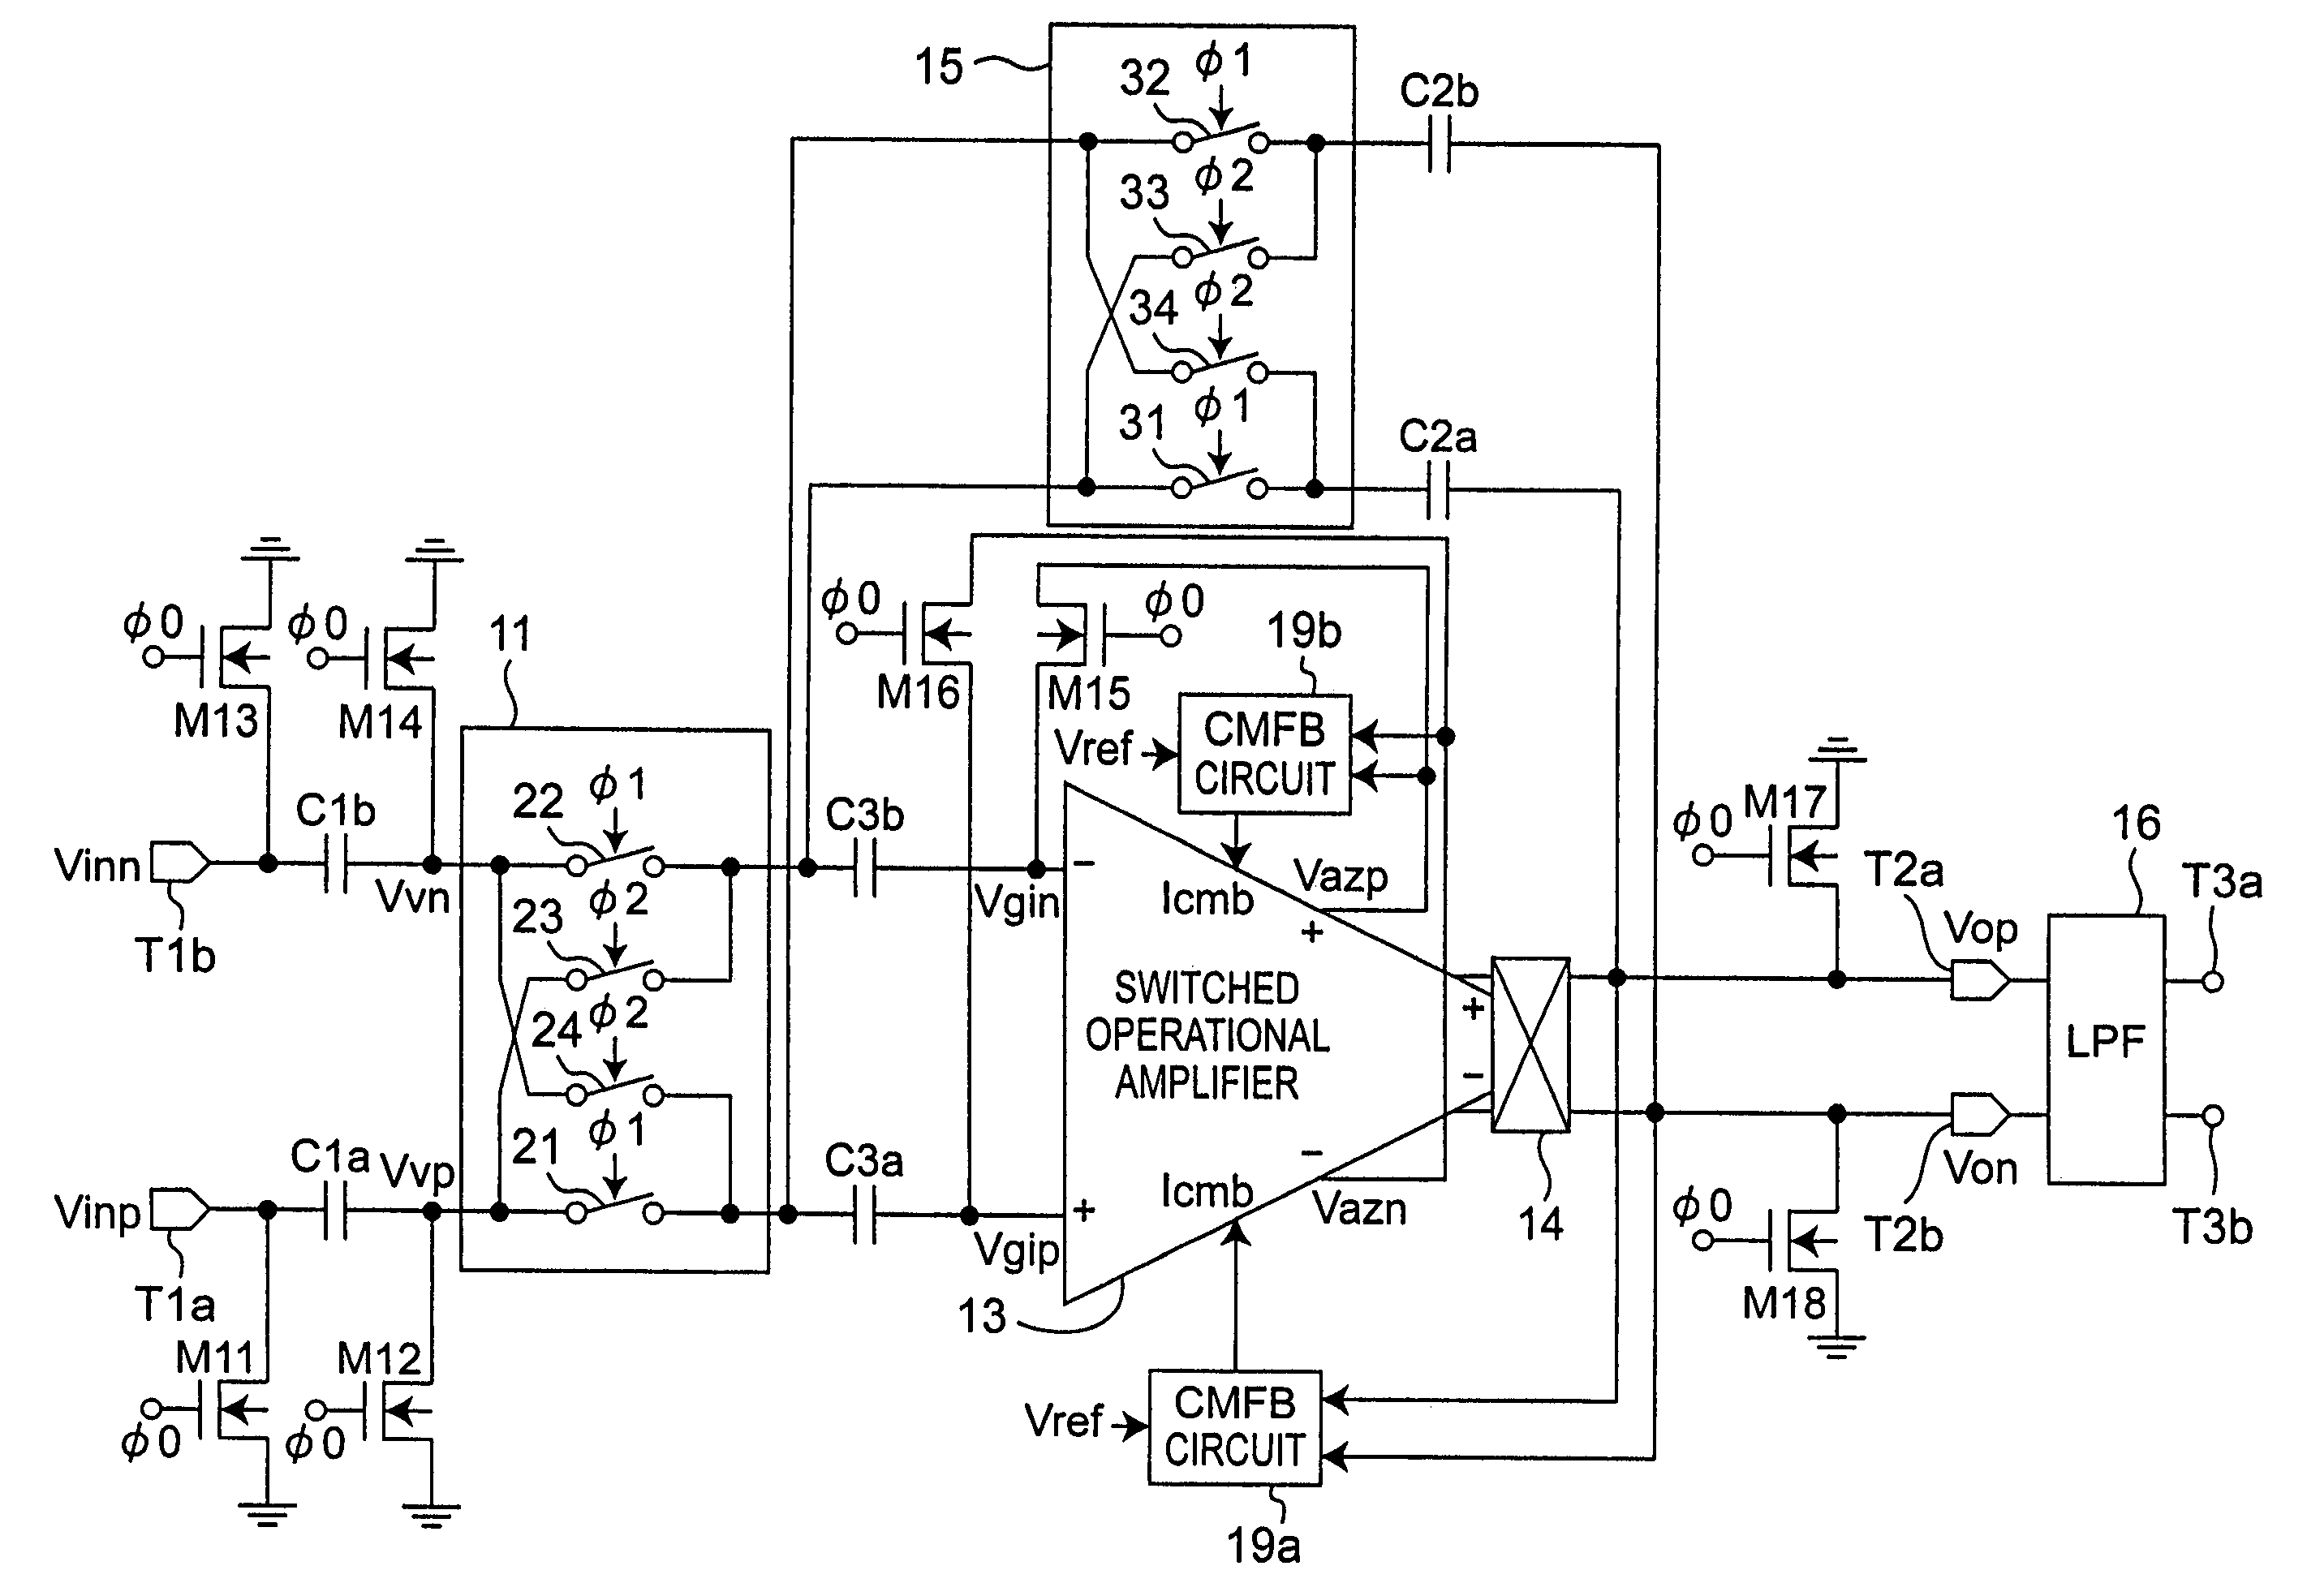 Feedback amplifier circuit operable at low voltage by utilizing switched operational amplifier and chopper modulator